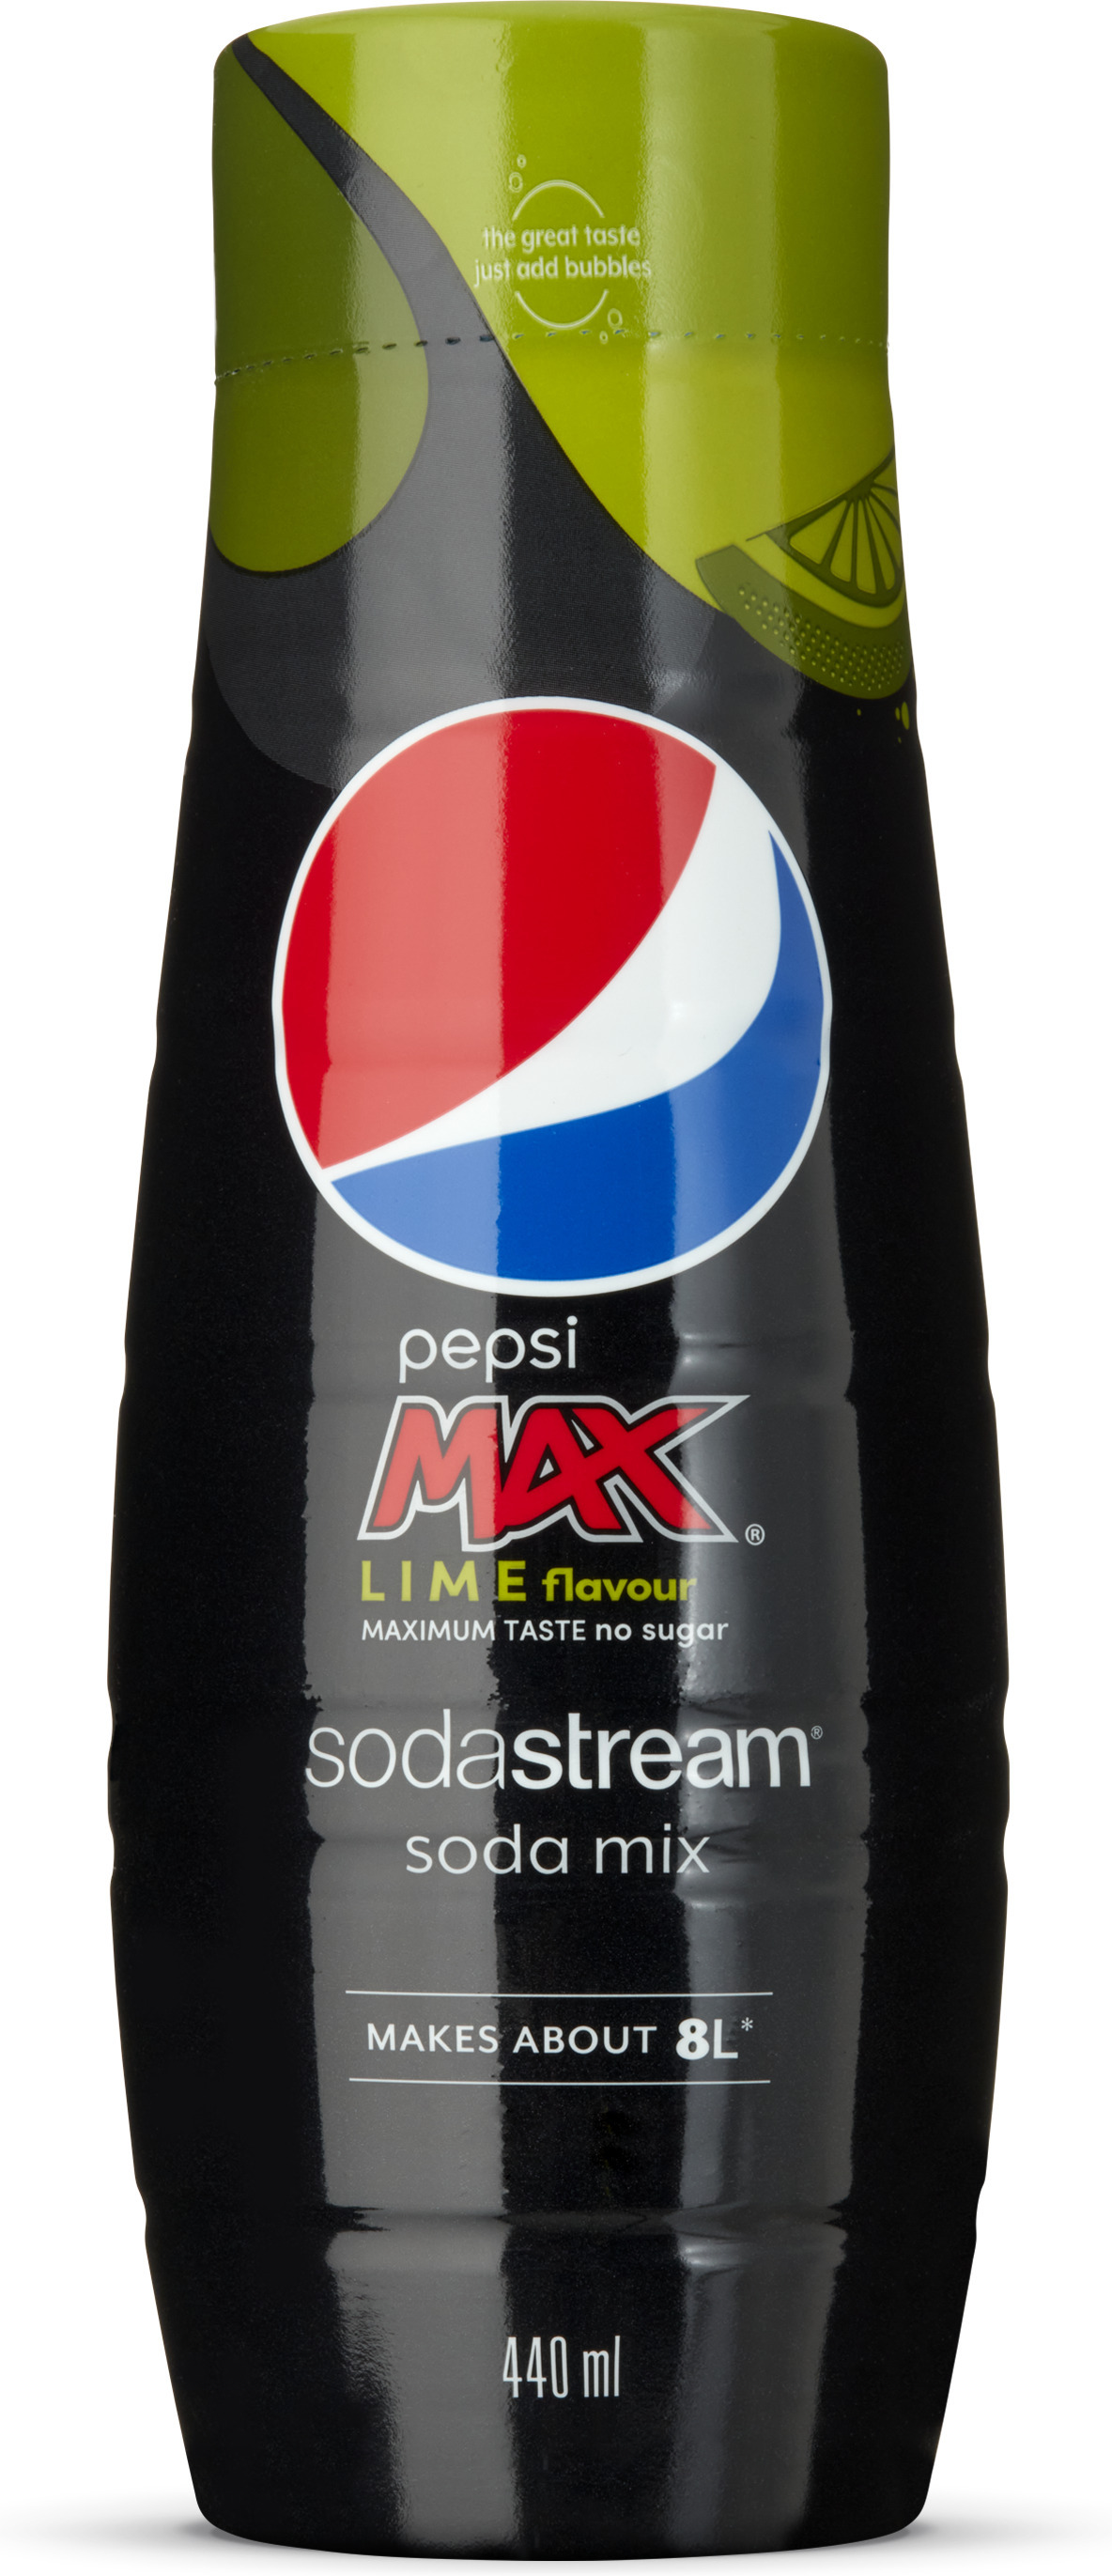 SodaStream Pepsi Max Lime 440 ml soft drink concentrate